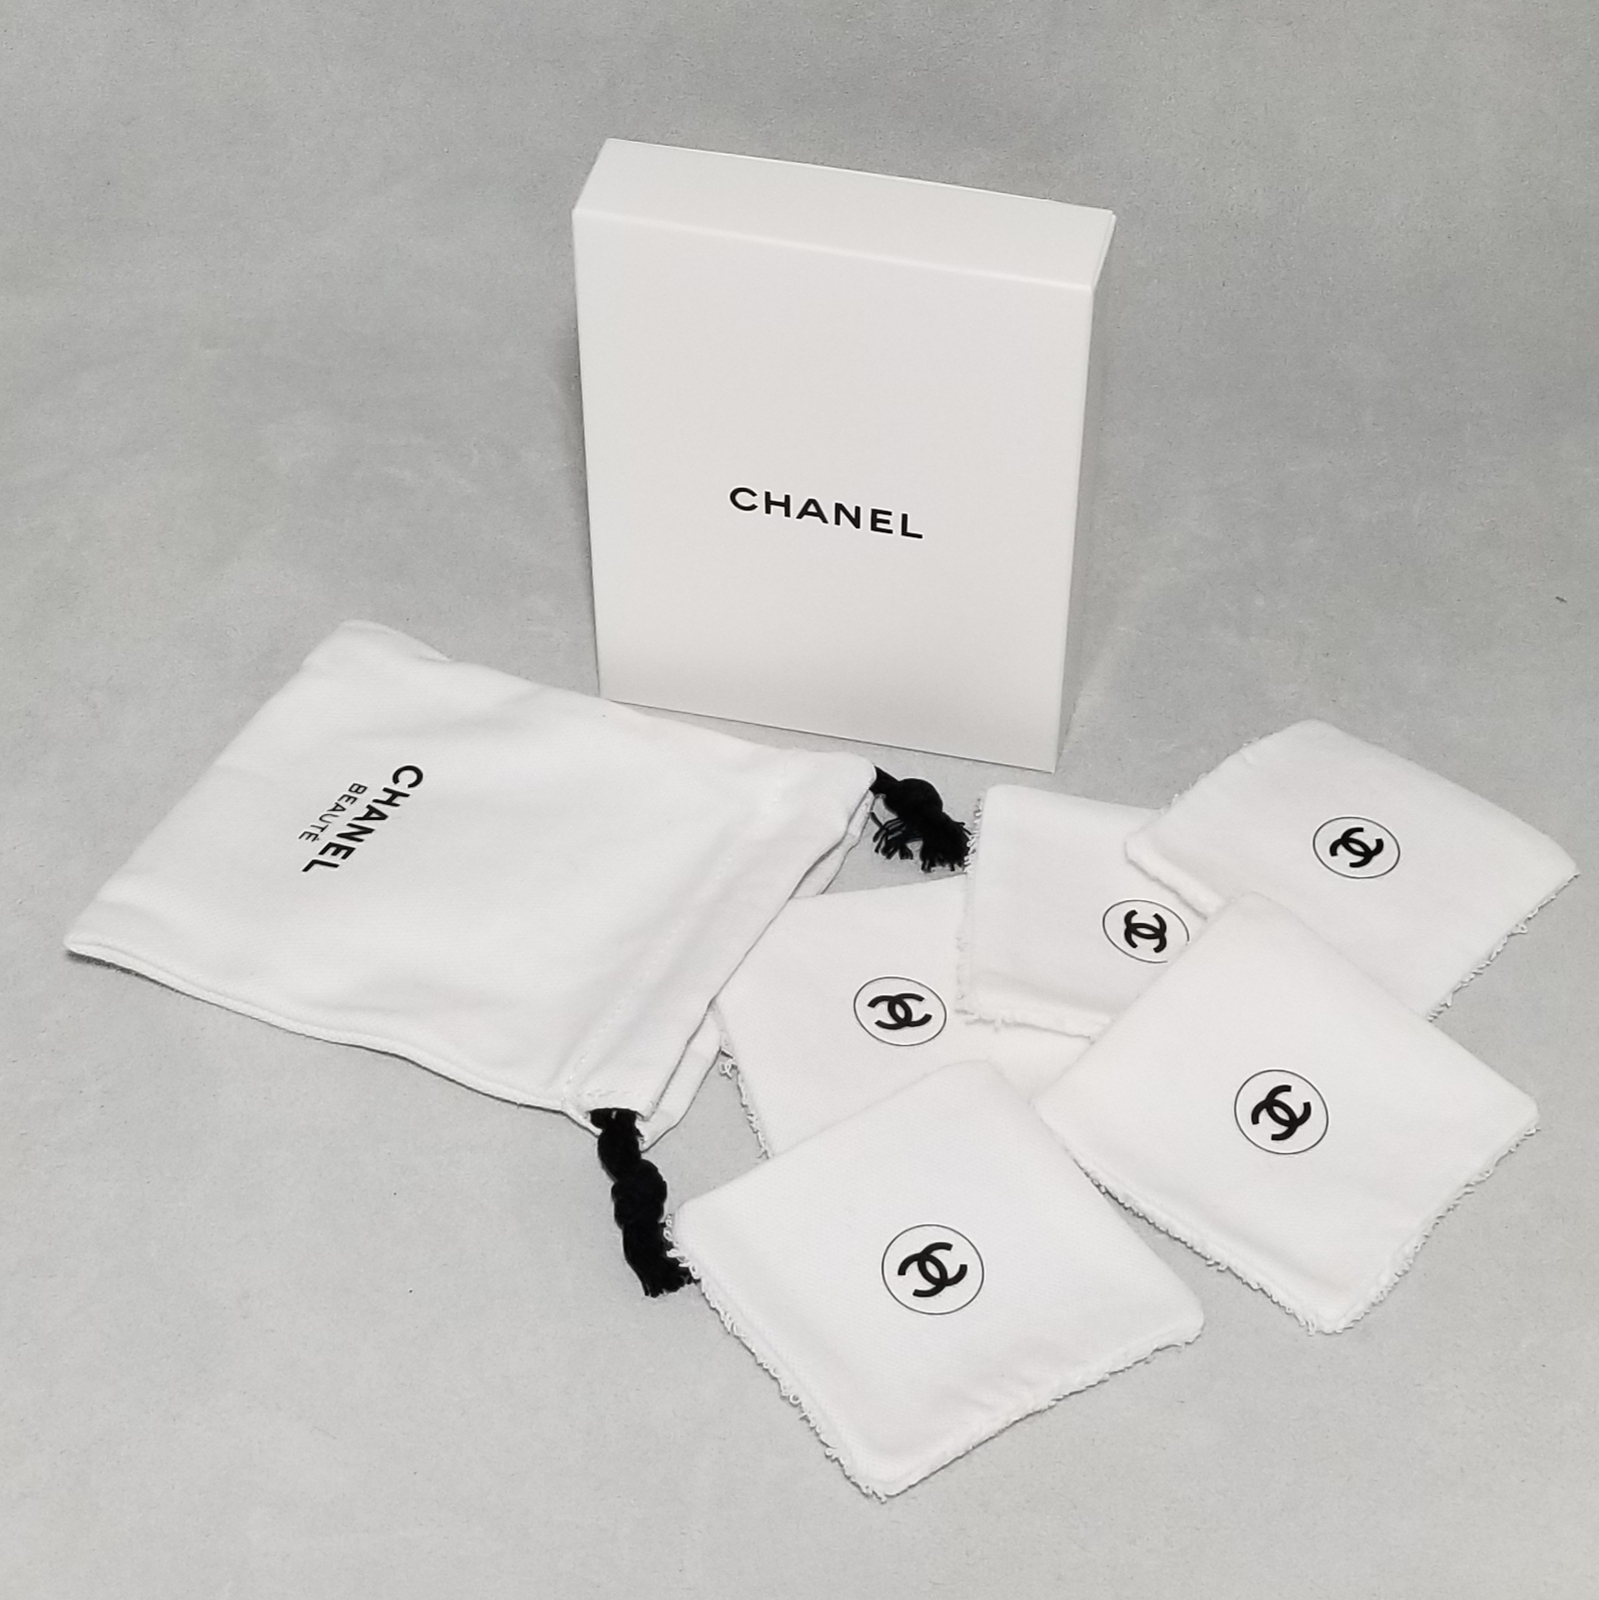 CHANEL VIP GIFT SET OF 5 WASHABLE COTTON PADS